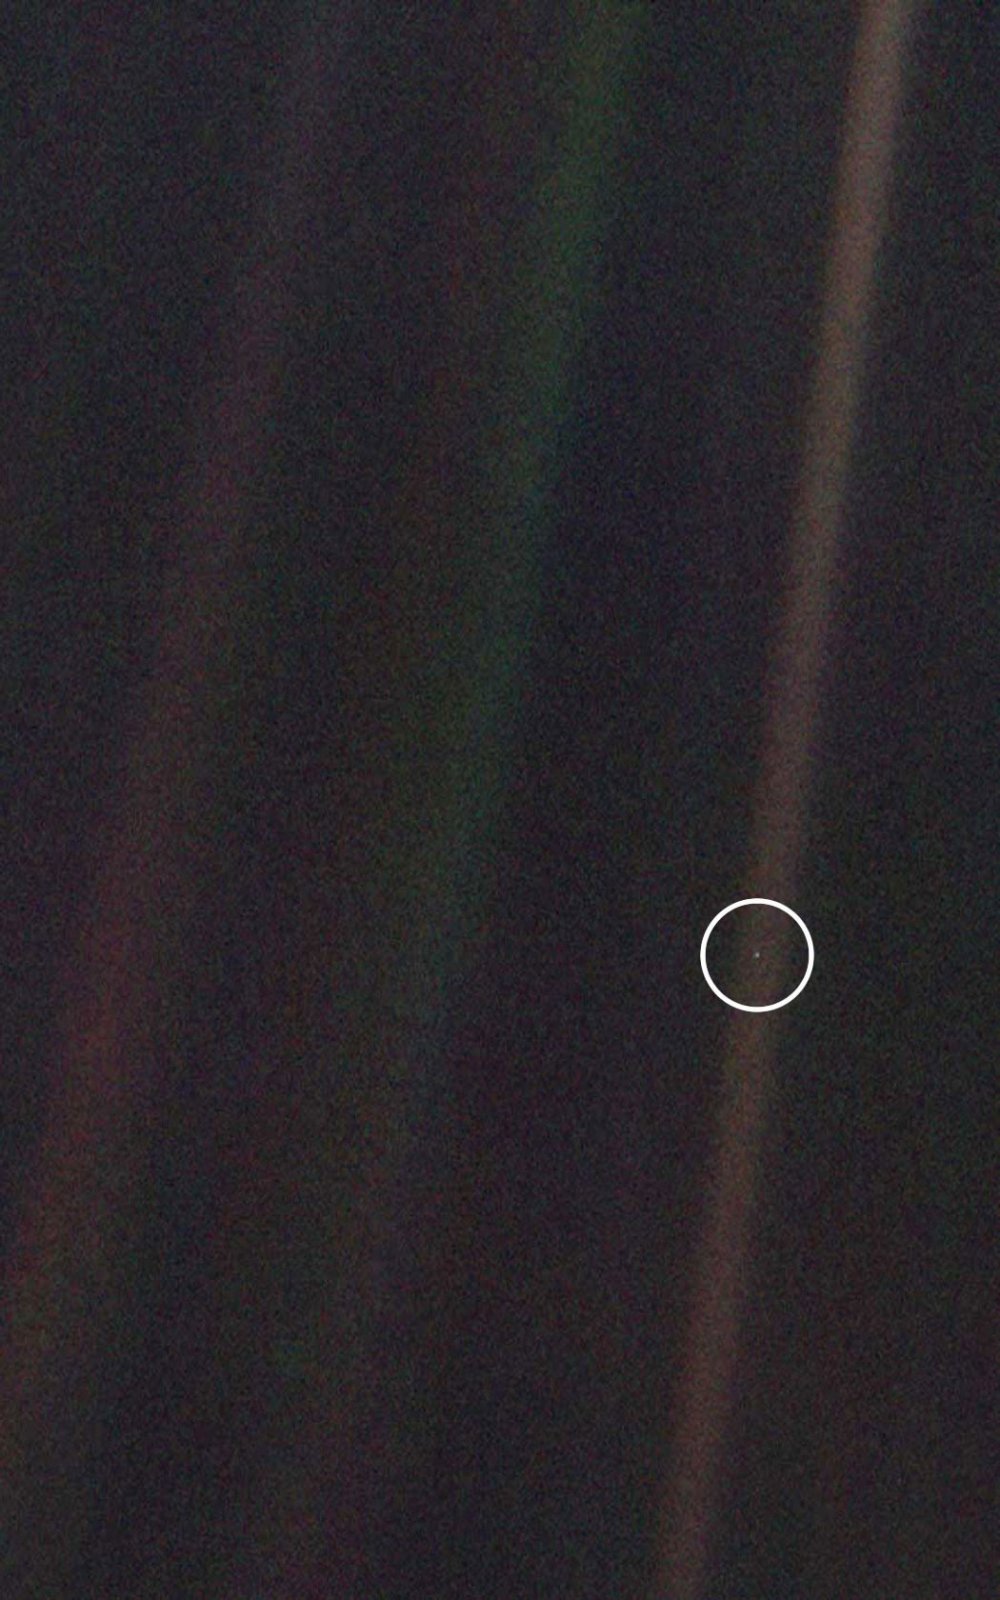 thw pale blue dot with our location indicated